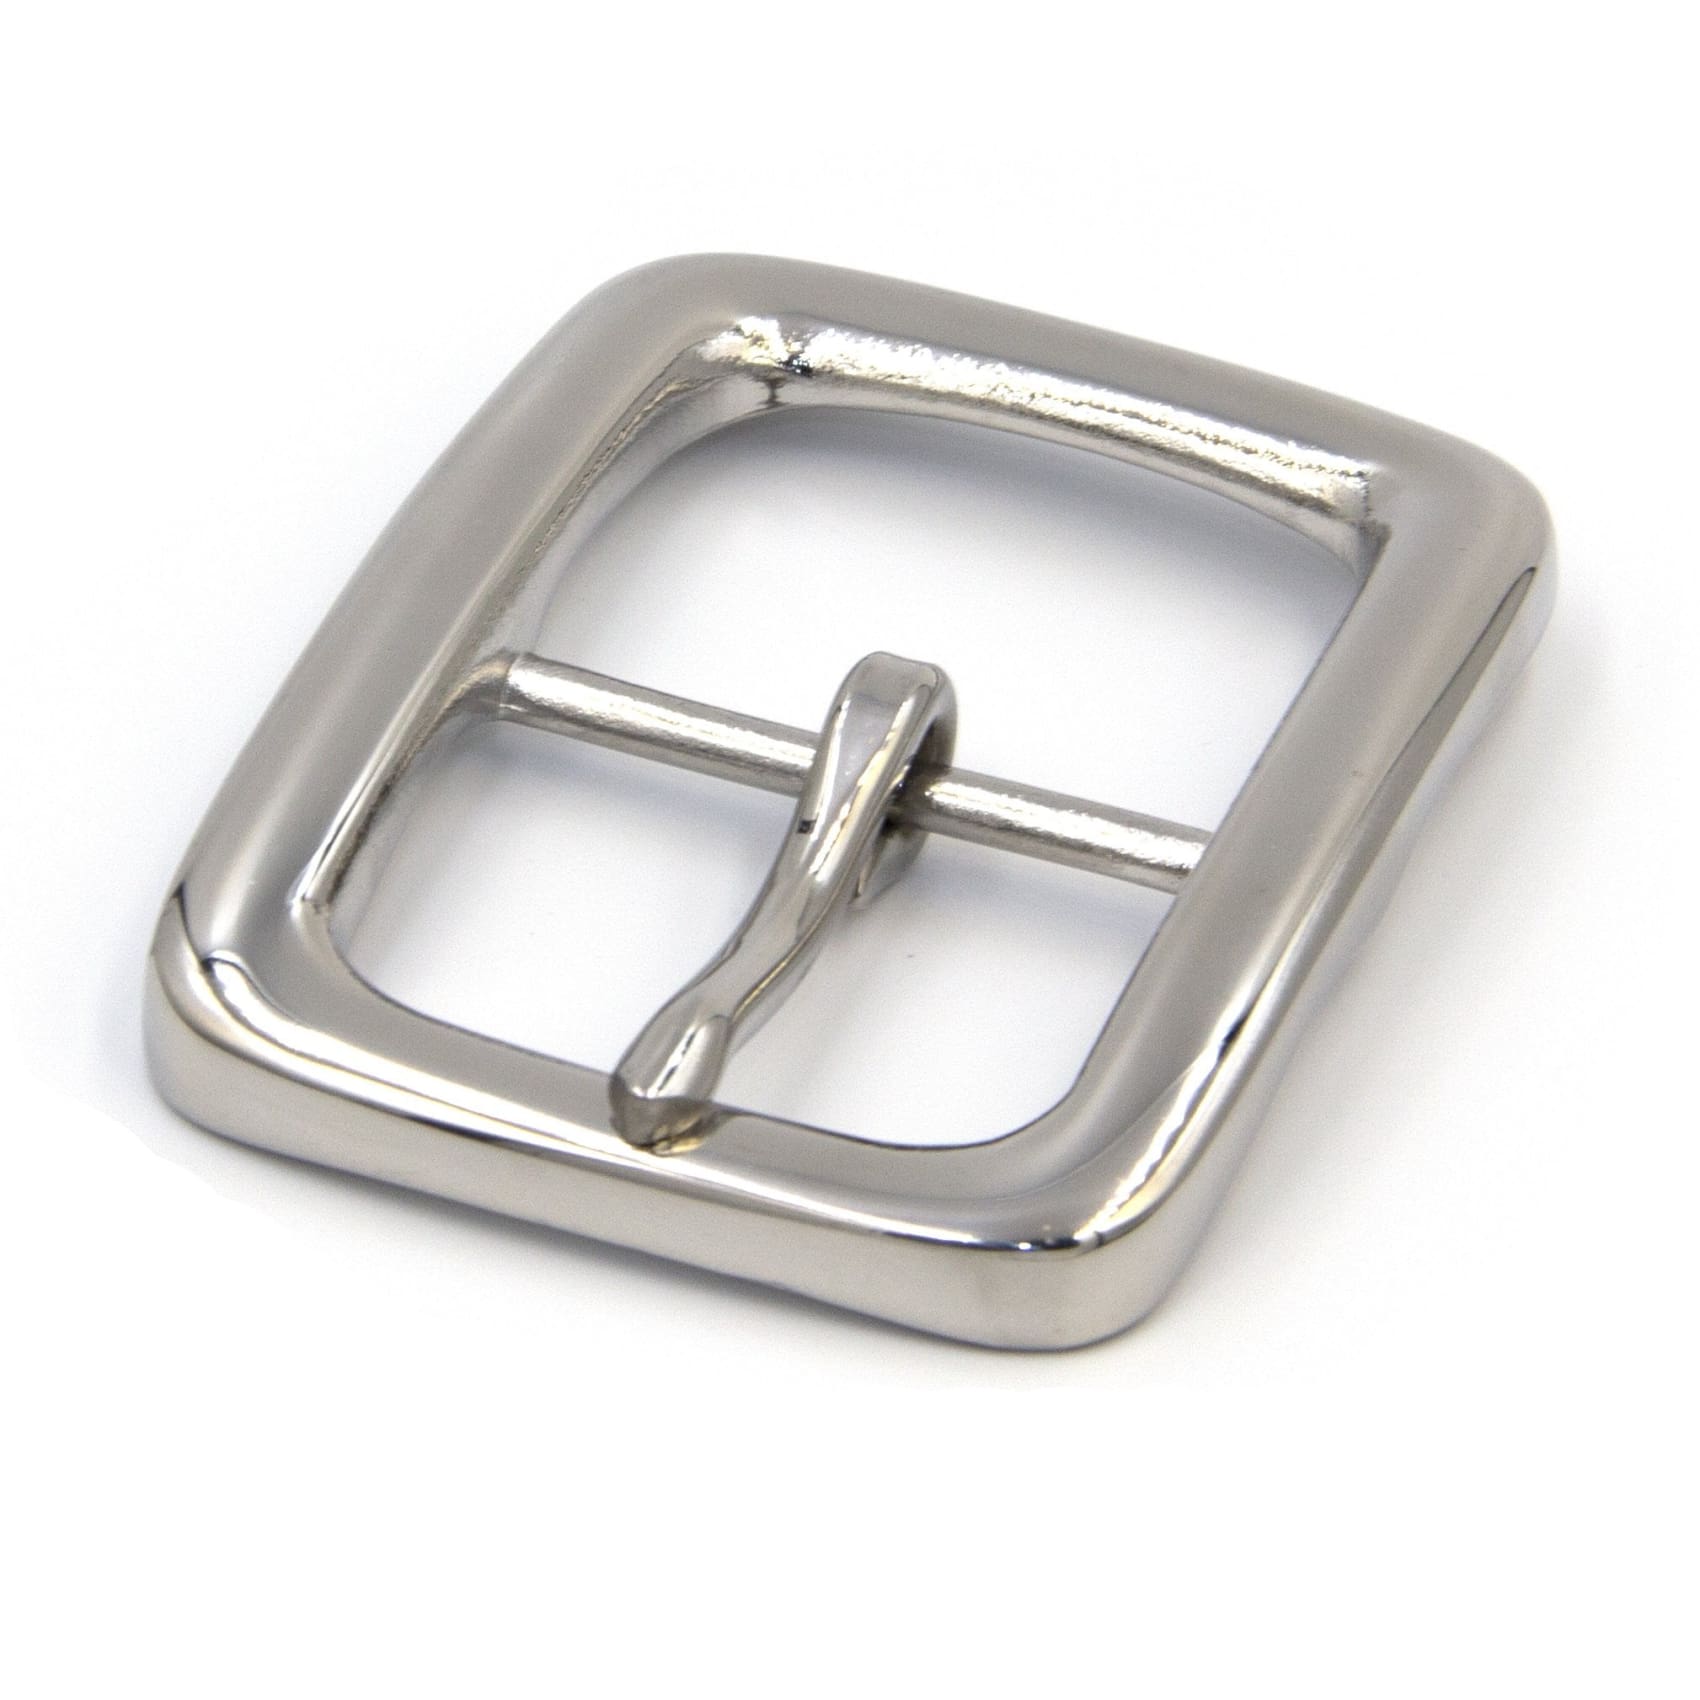 Durable Shiny Stainless Buckle For Men's Leather Belt - Metal Field Shop